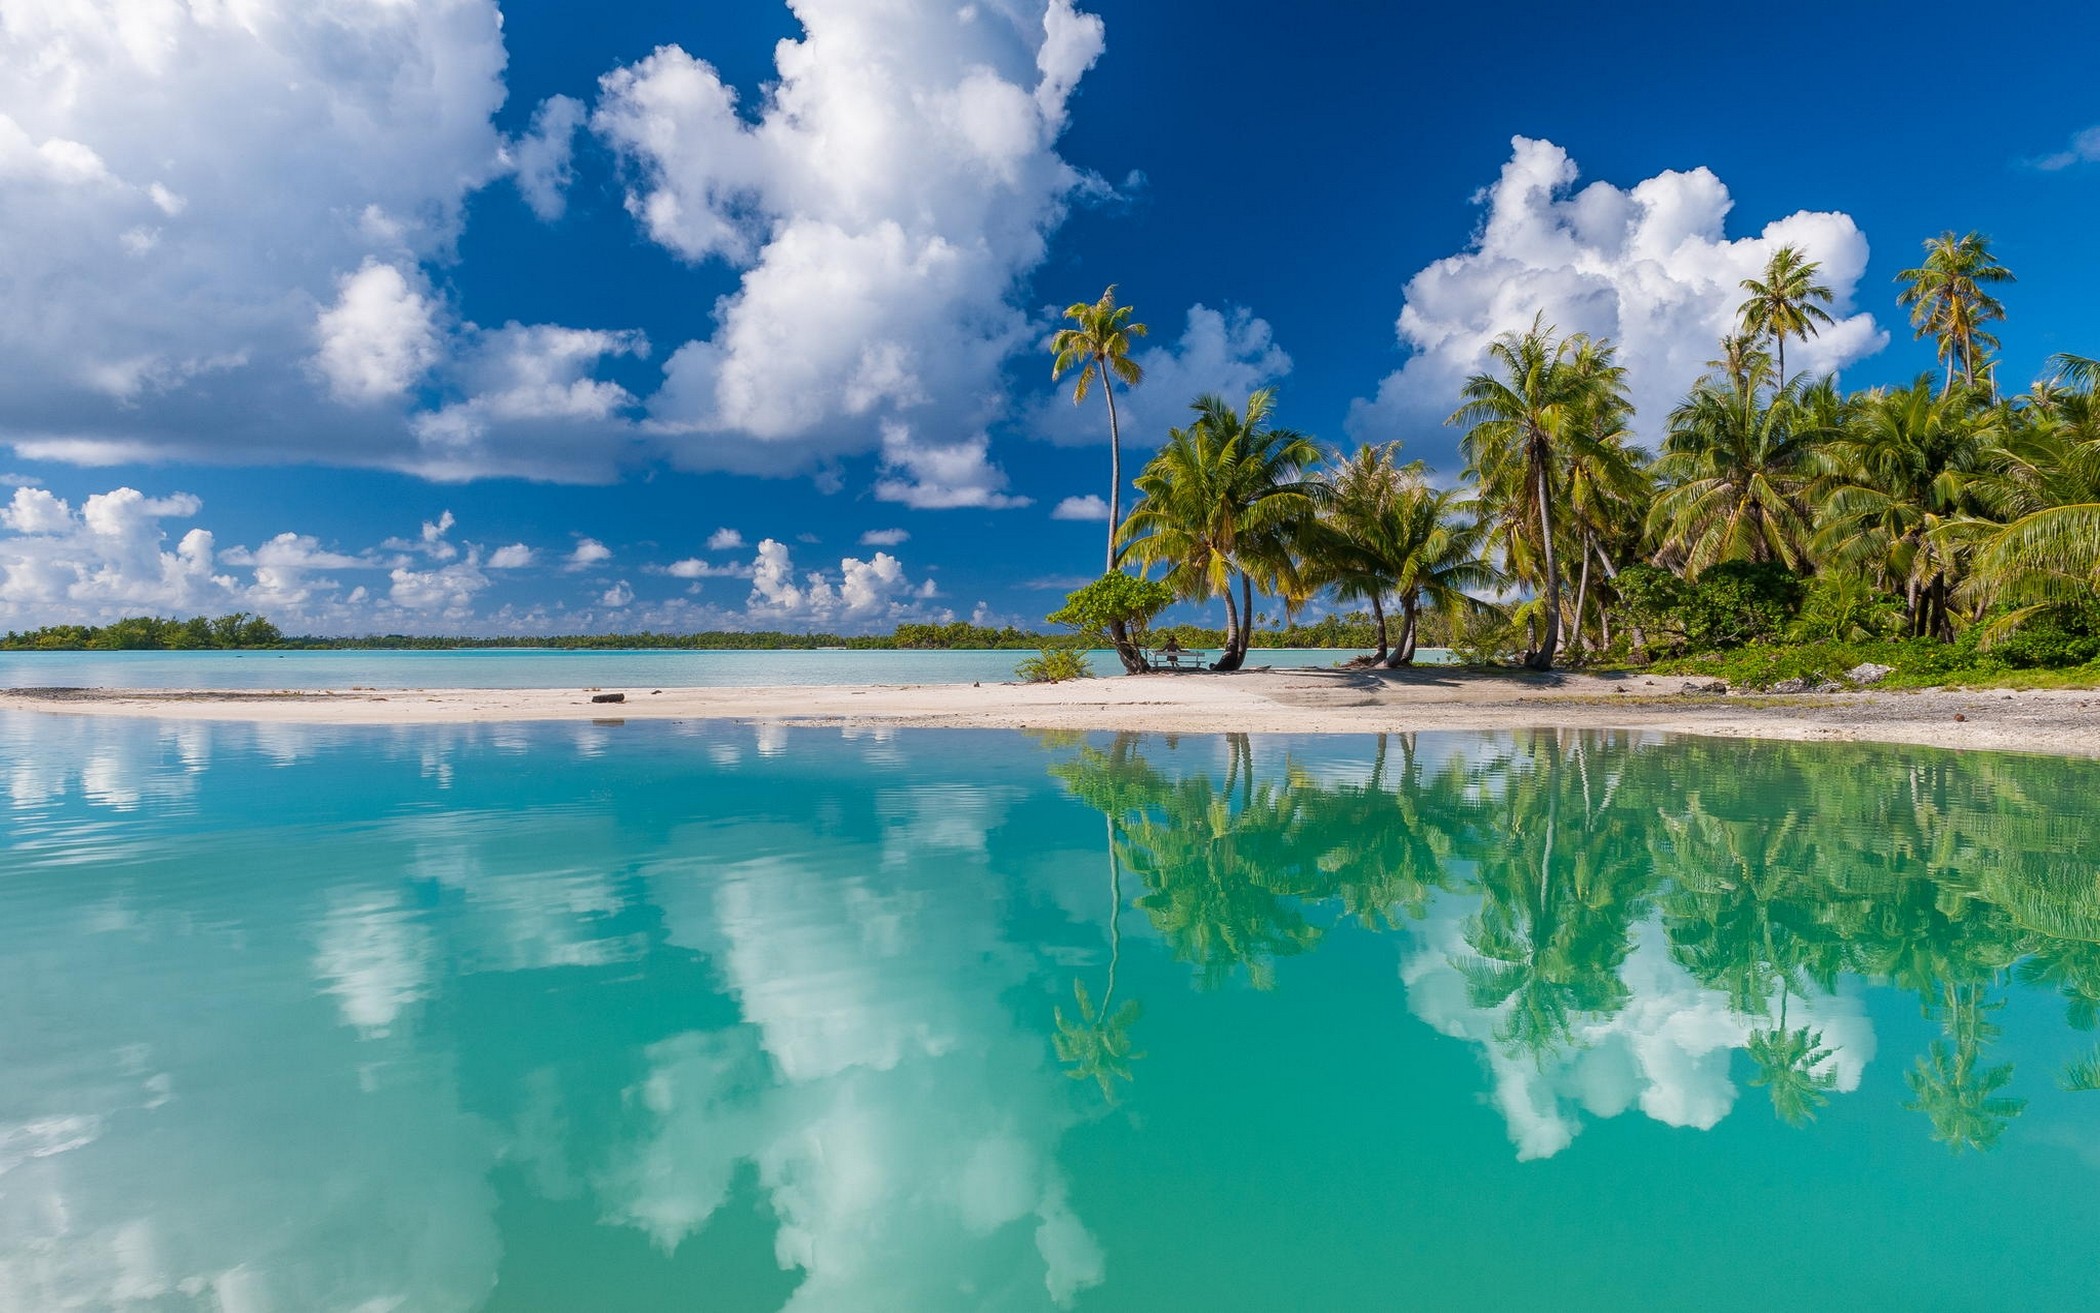 Nature Tropical Island Beach White Sand Turquoise Sea Reflection Summer French Polynesia Clouds Palm 2100x1313